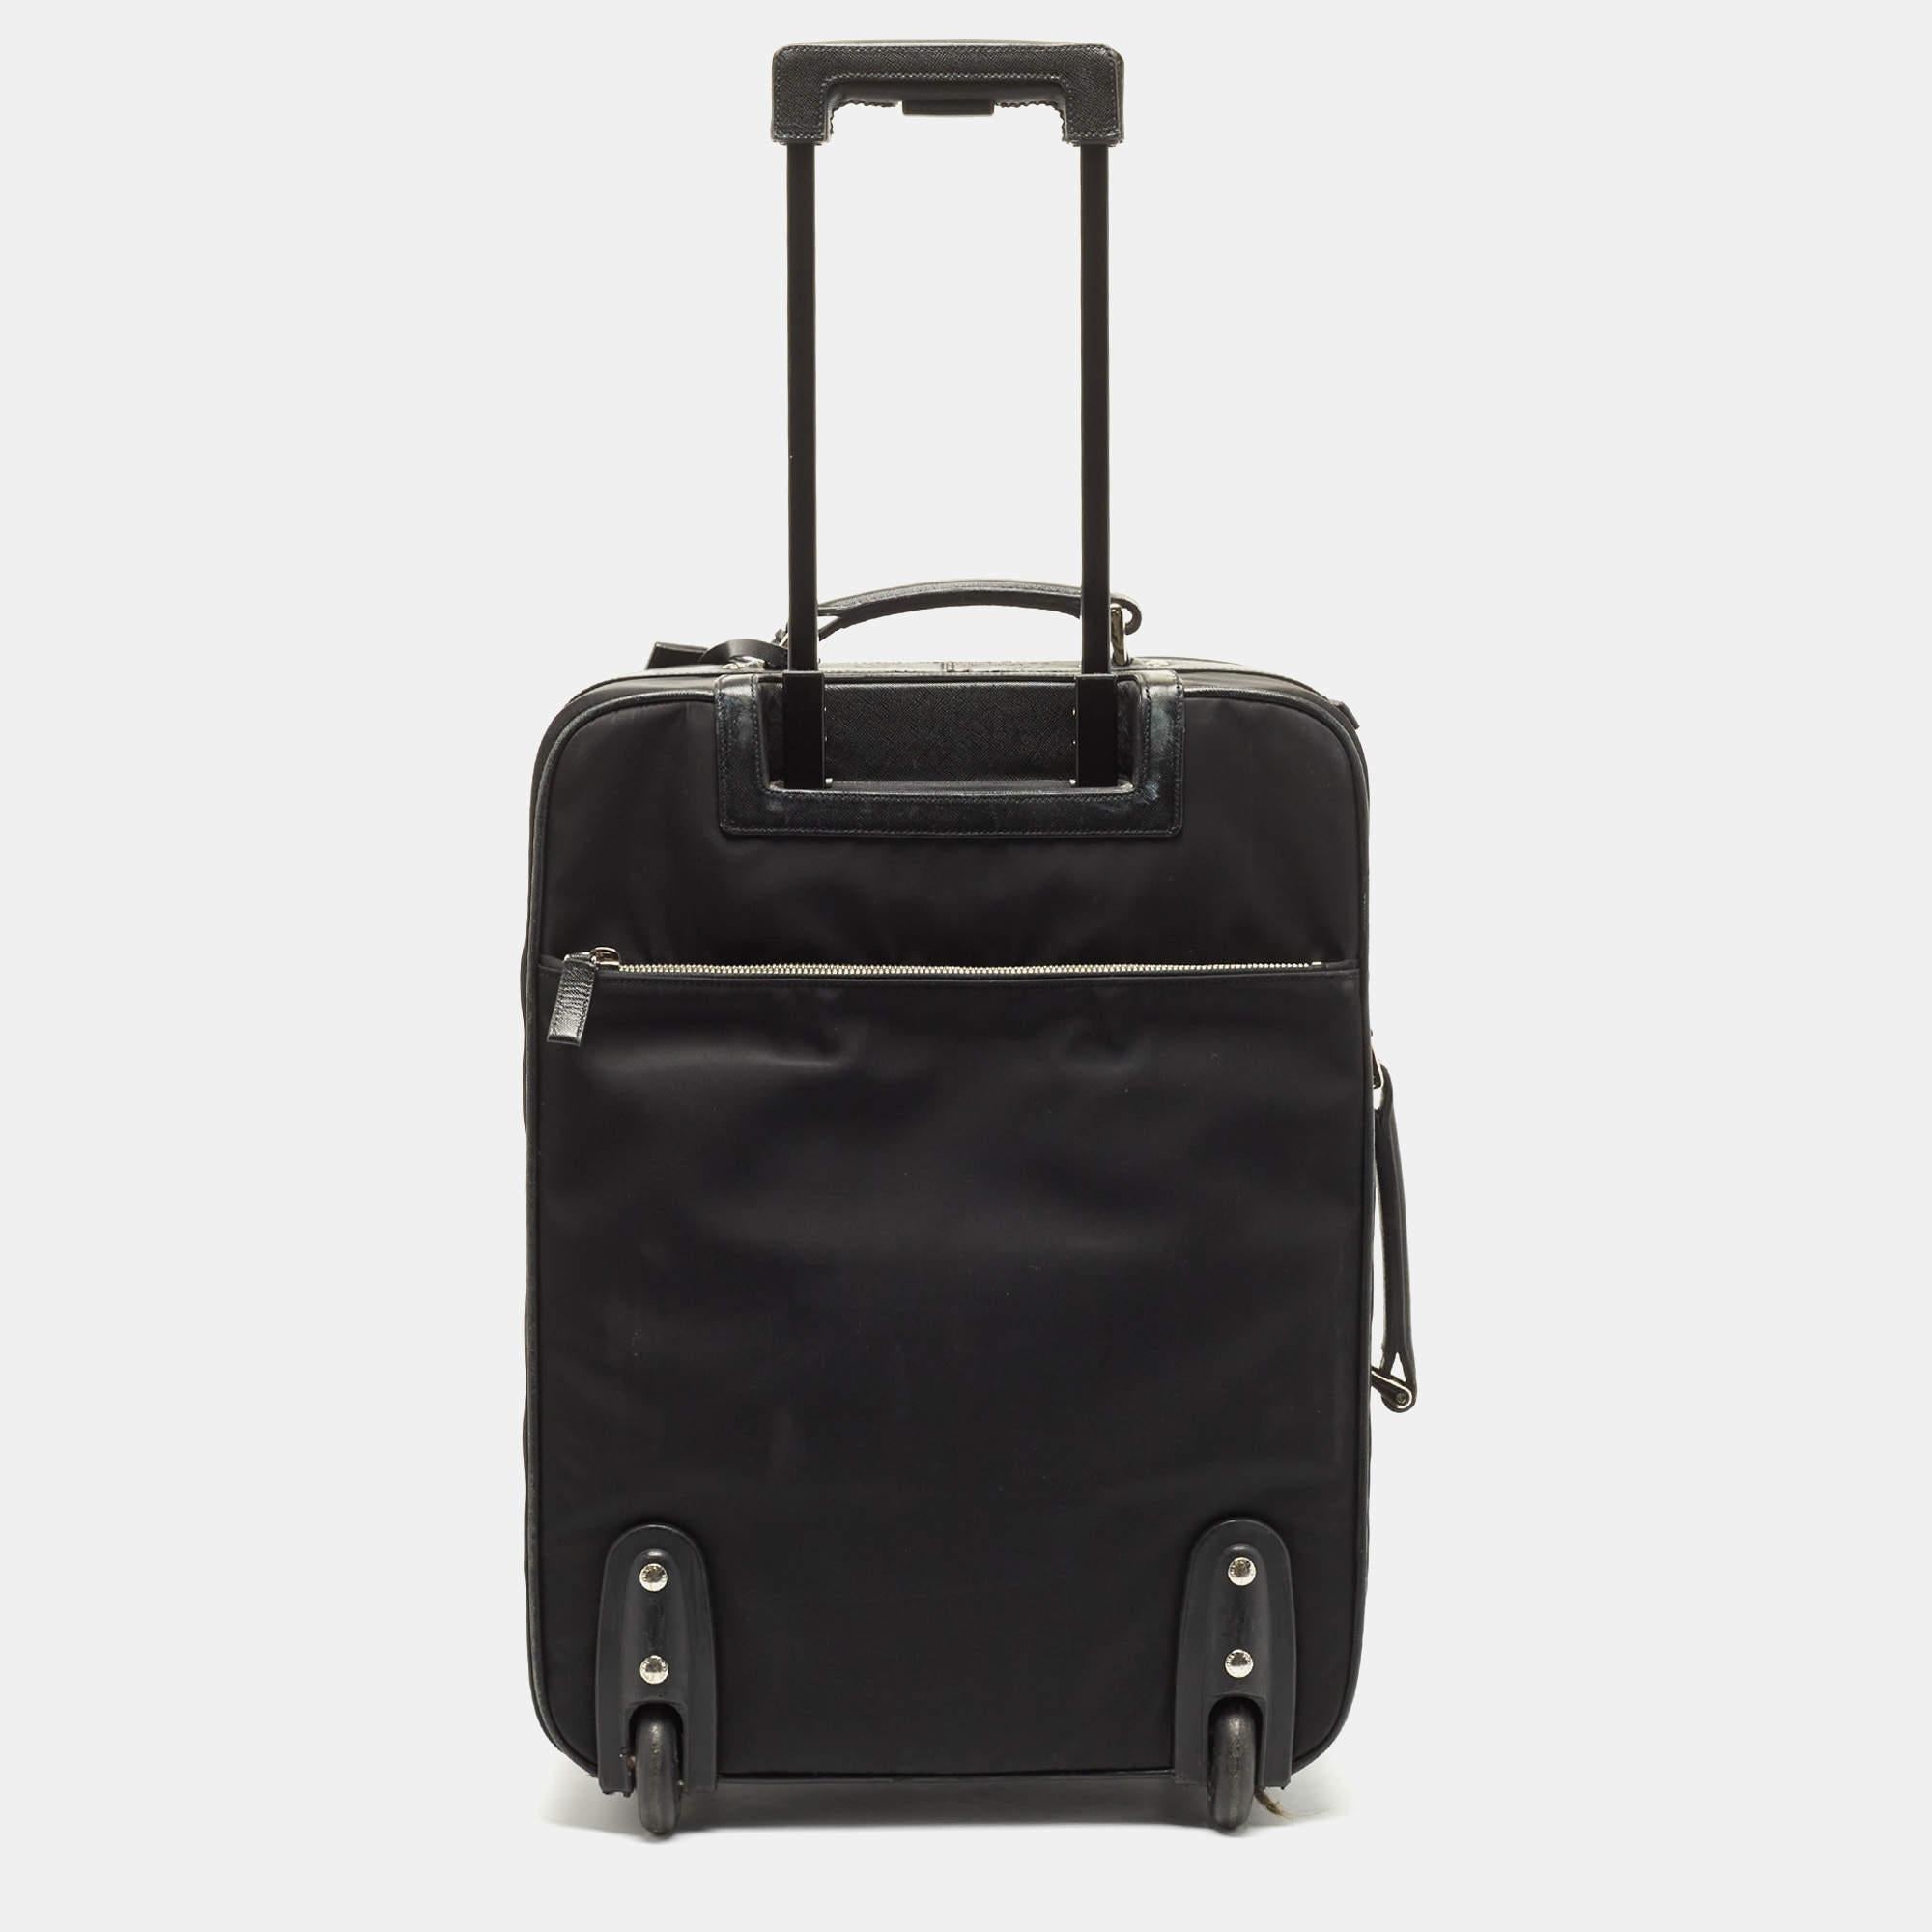 An essential companion on longer adventures, this amazing luggage is the ultimate piece for your wardrobe. The sturdy silhouette and fine finish will turn heads wherever you go.

Includes: Authenticity Card, Leather Name Tag,